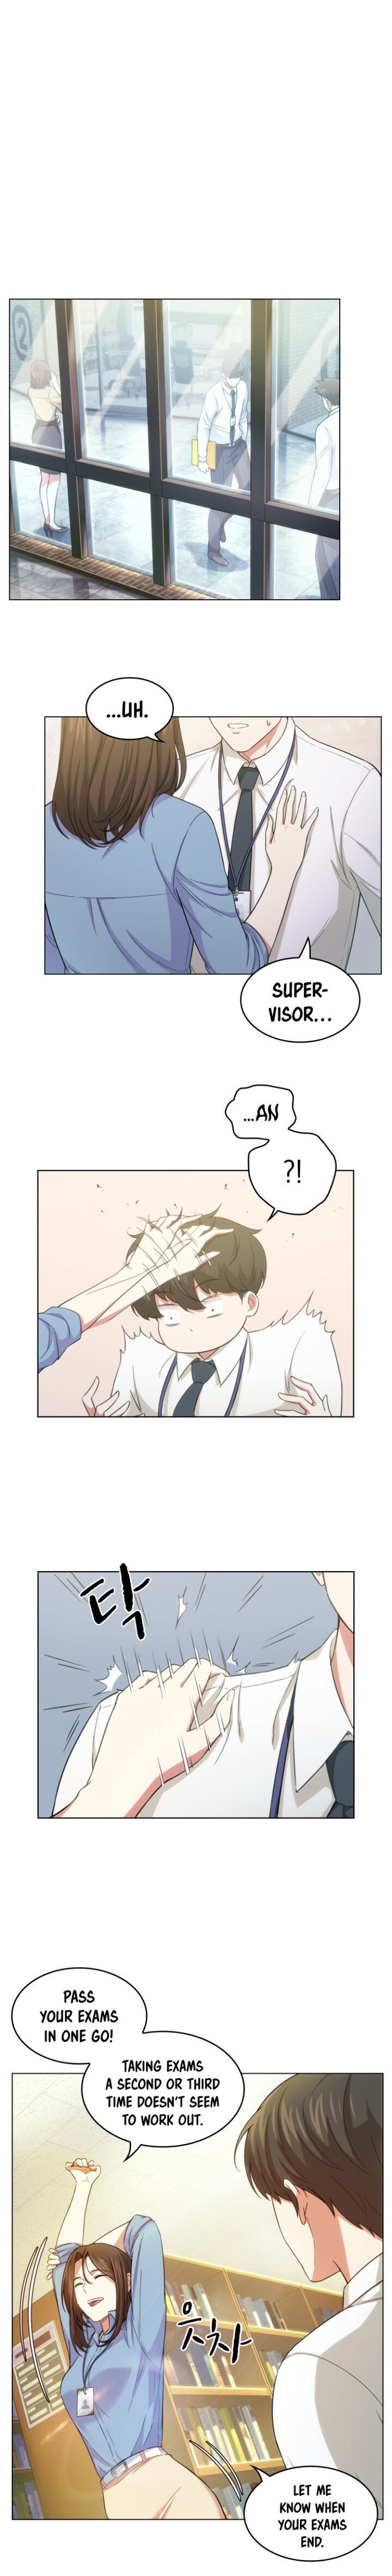 My Office Noona’s Story - Chapter 13 Page 5